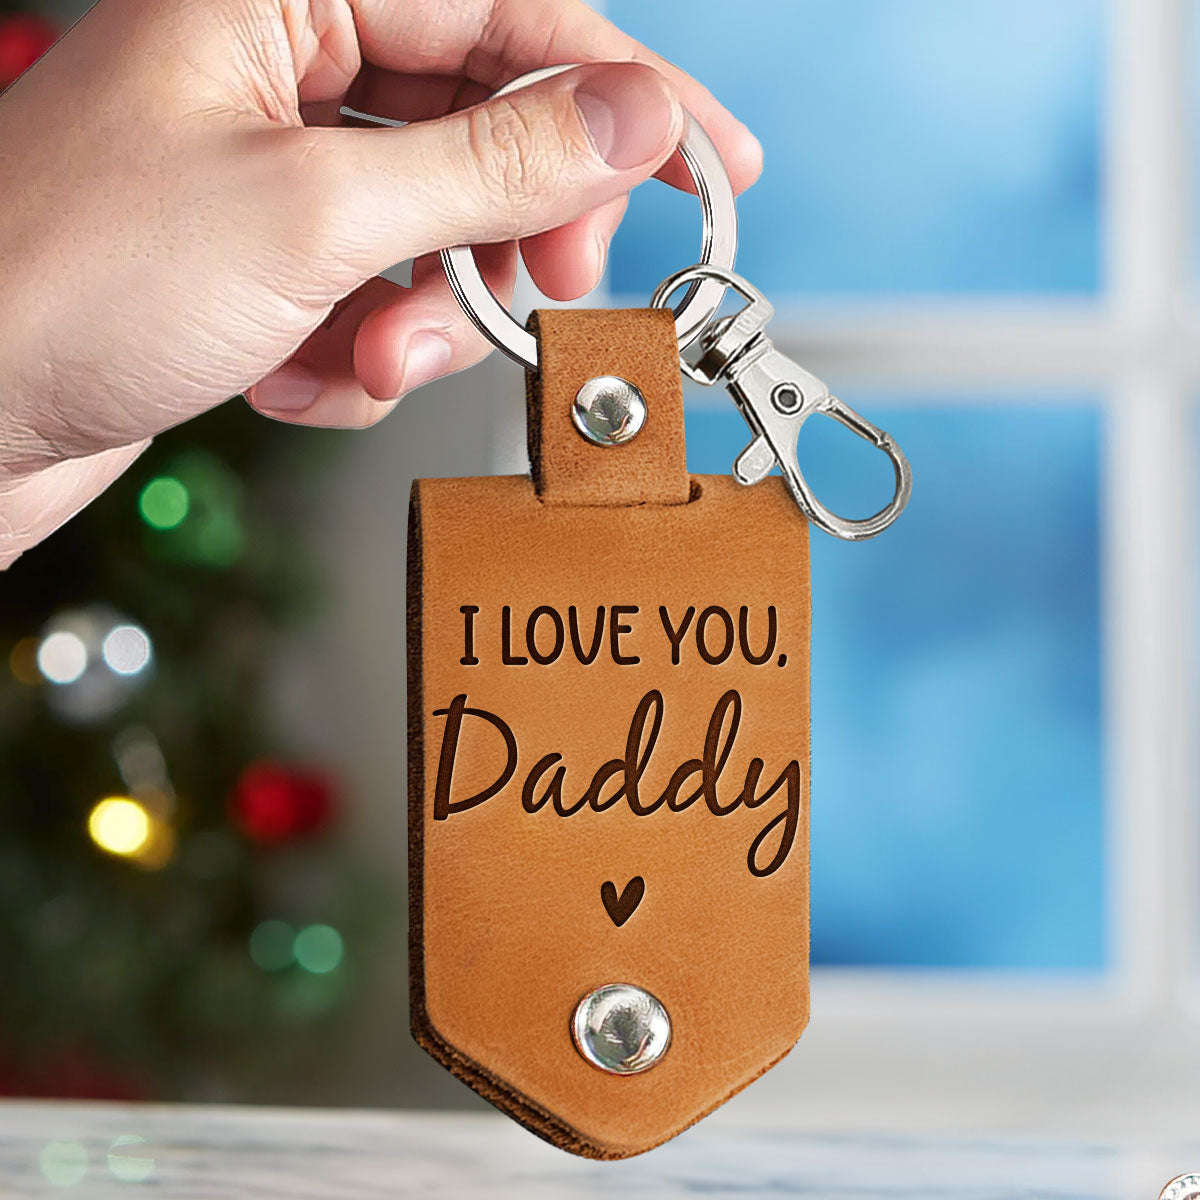 Daddy Can't Wait To Meet You From The Bump - Personalized Leather Photo Keychain